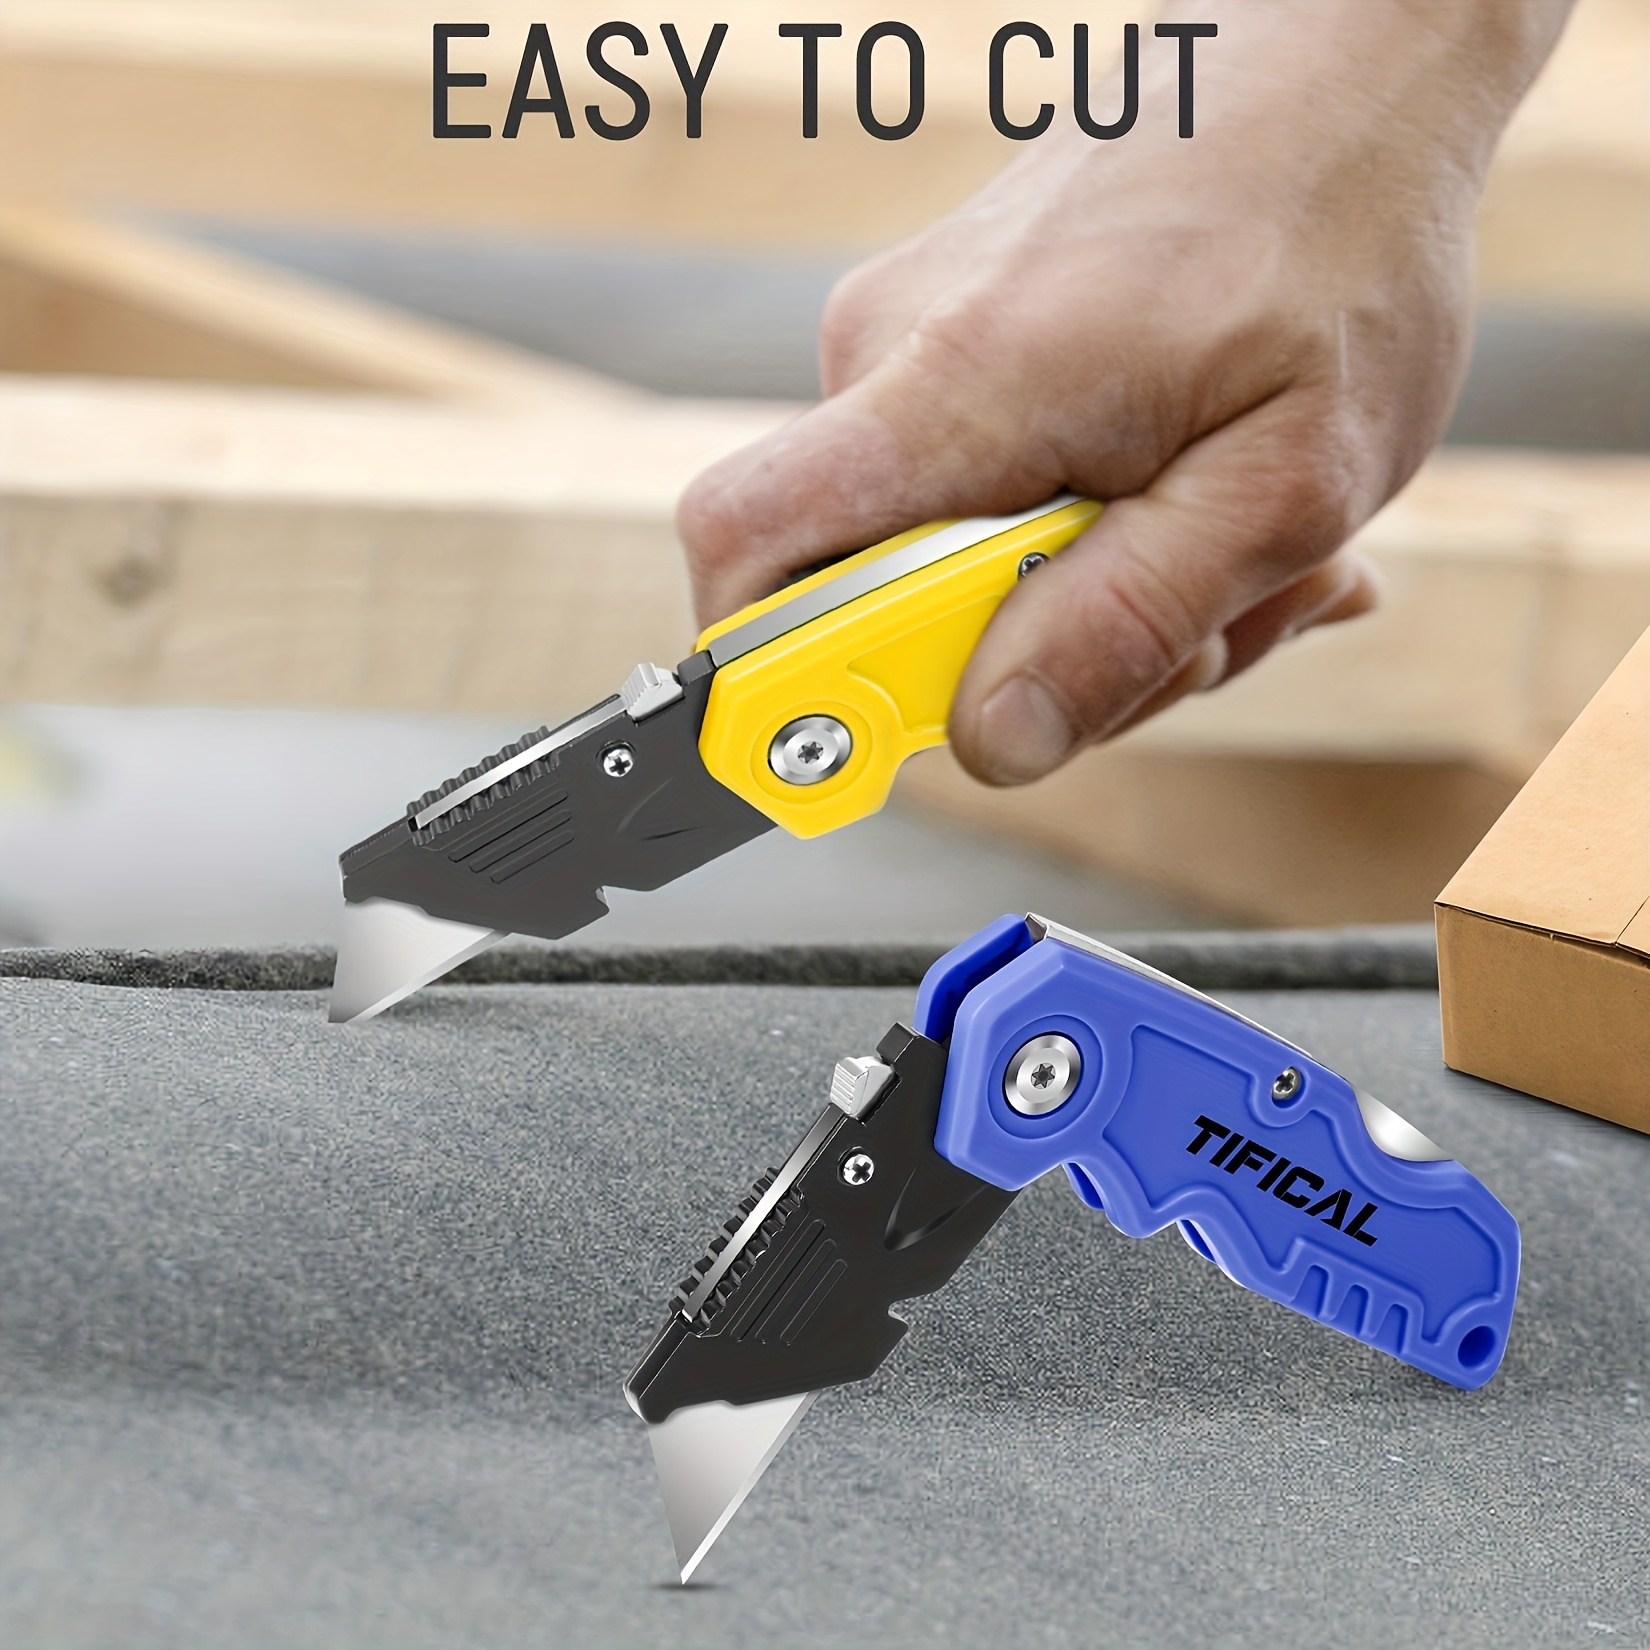 Cardboard Box Resizer Tool - Utility Knife Cutter with Non